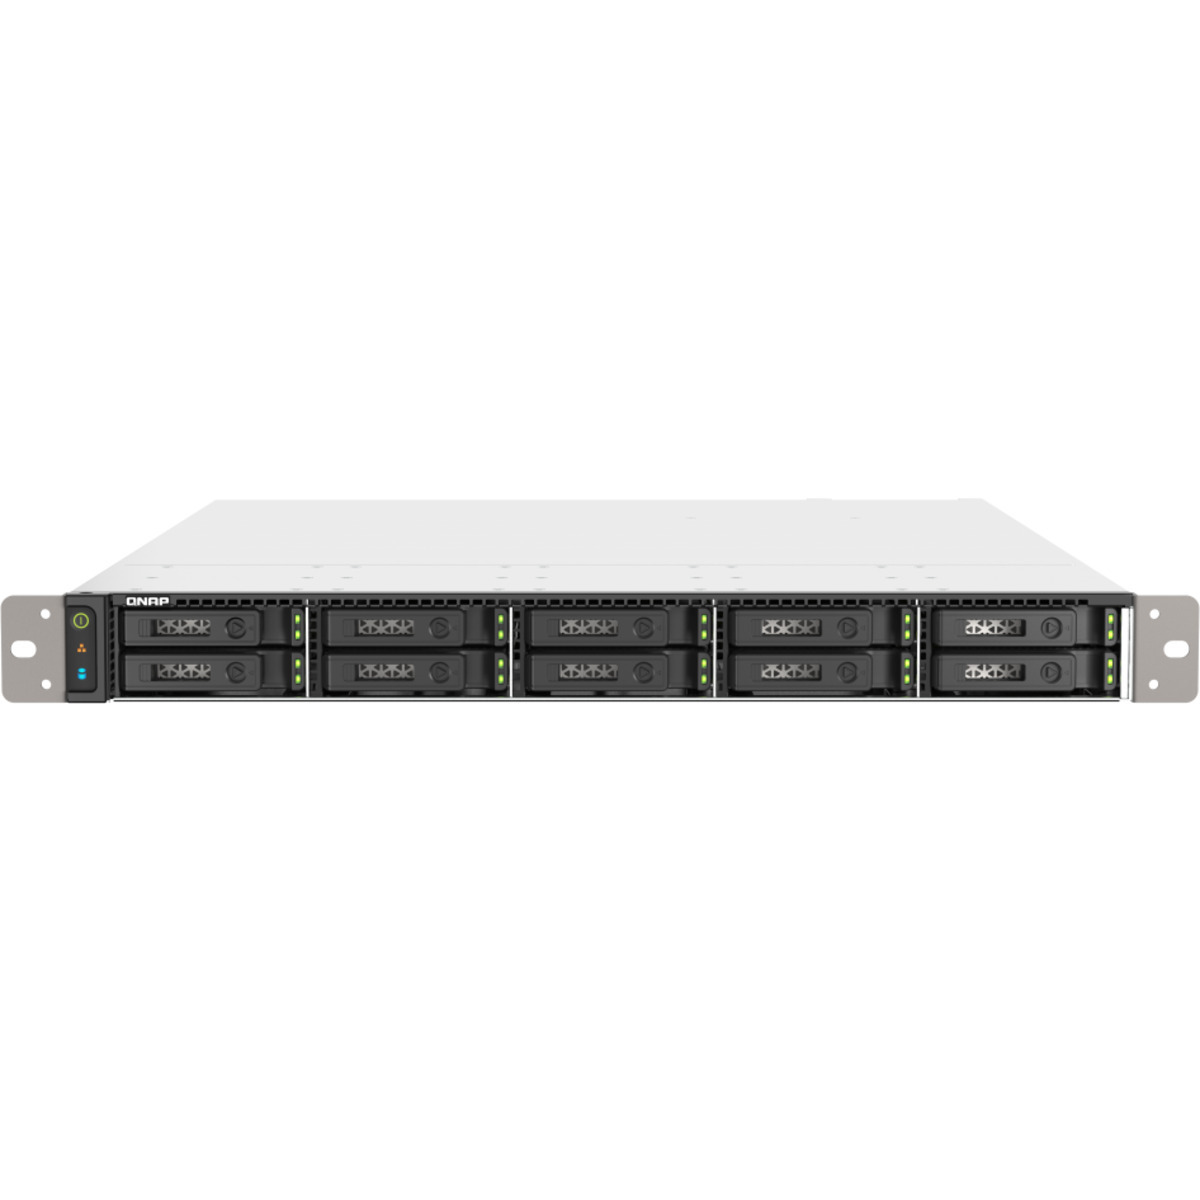 QNAP TS-h1090FU-7232P NAS - Network Attached Storage Device Burn-In Tested Configurations